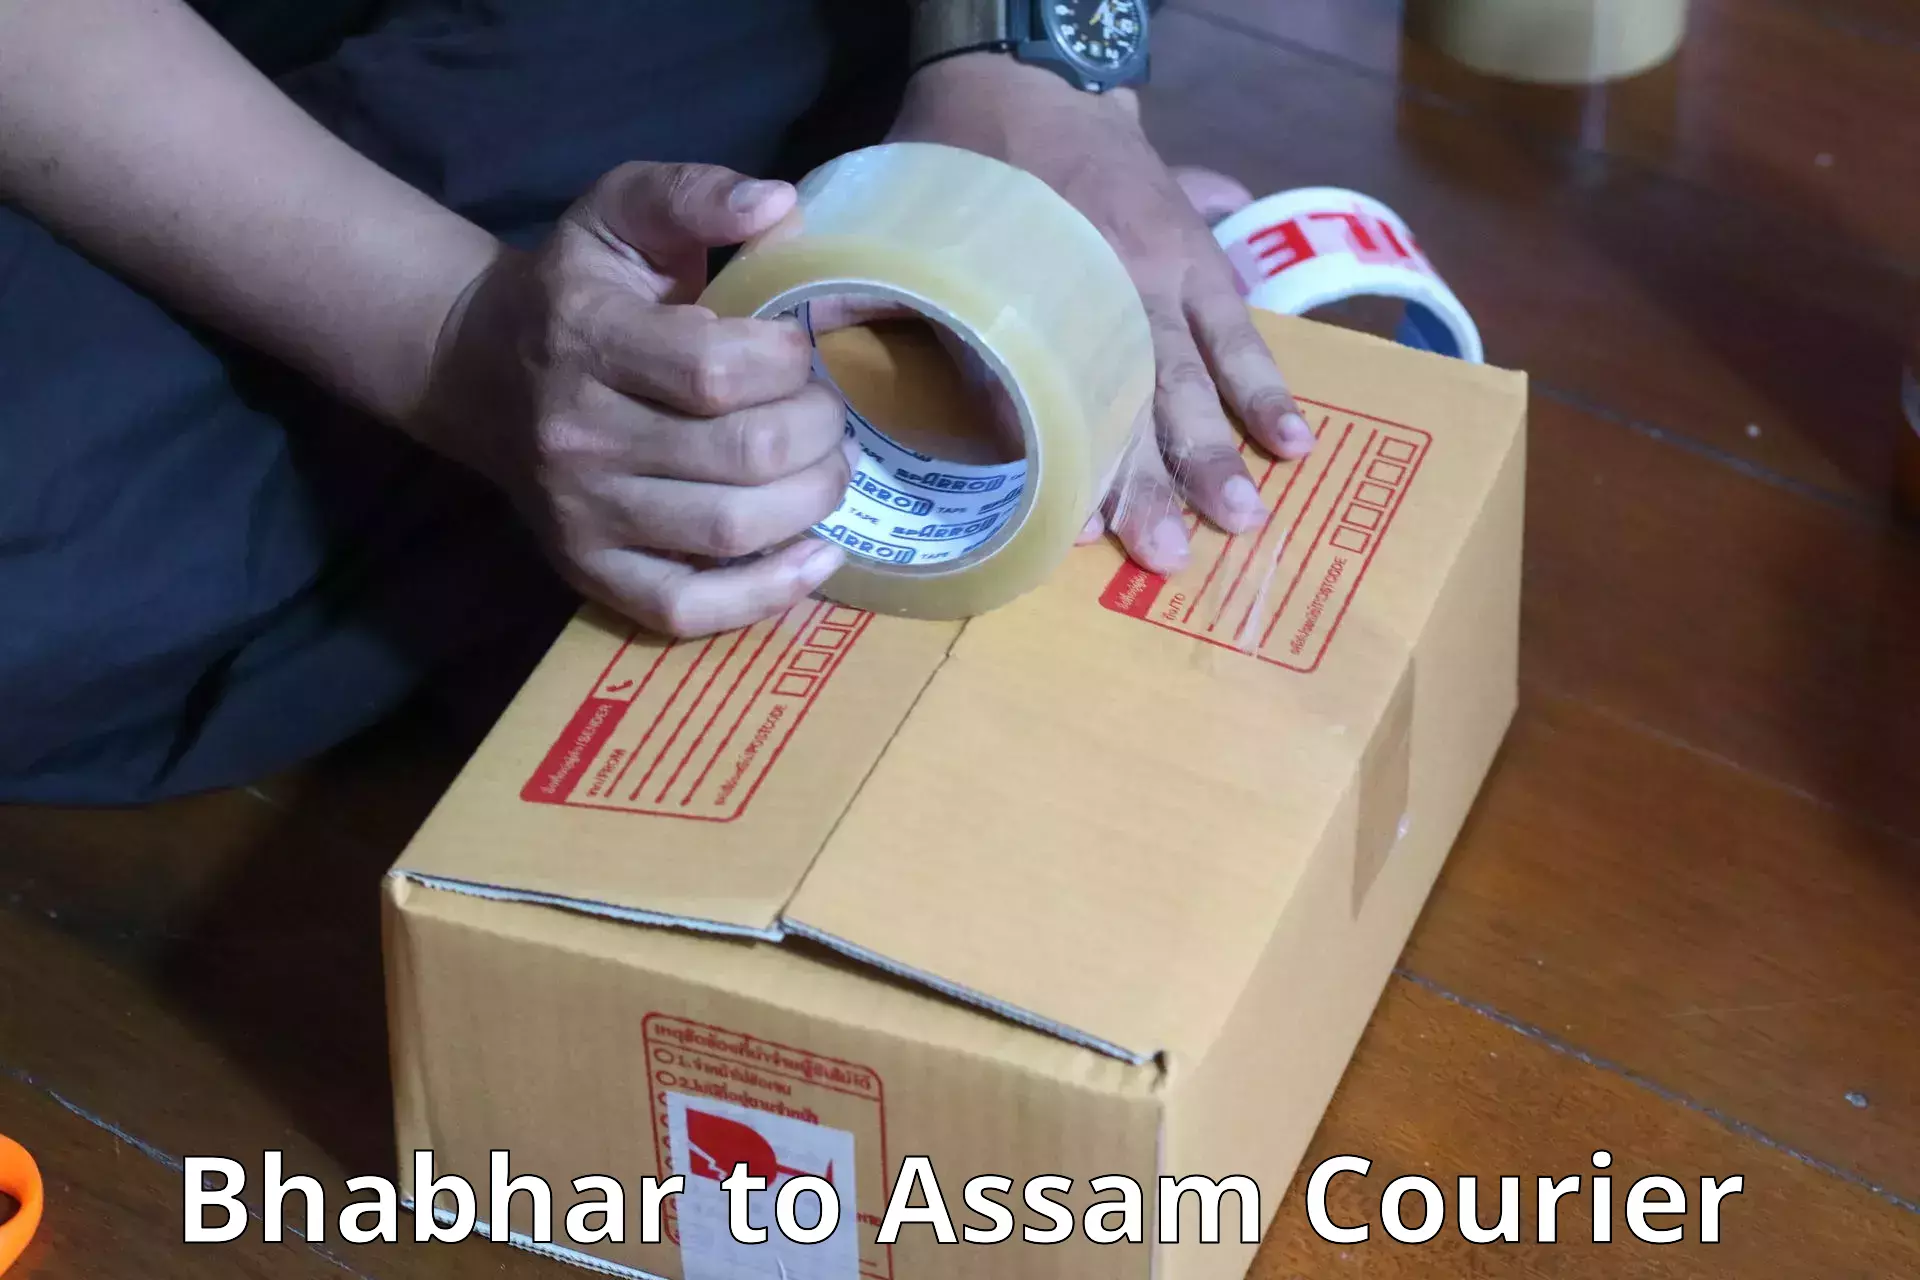 Personal effects shipping in Bhabhar to Digboi